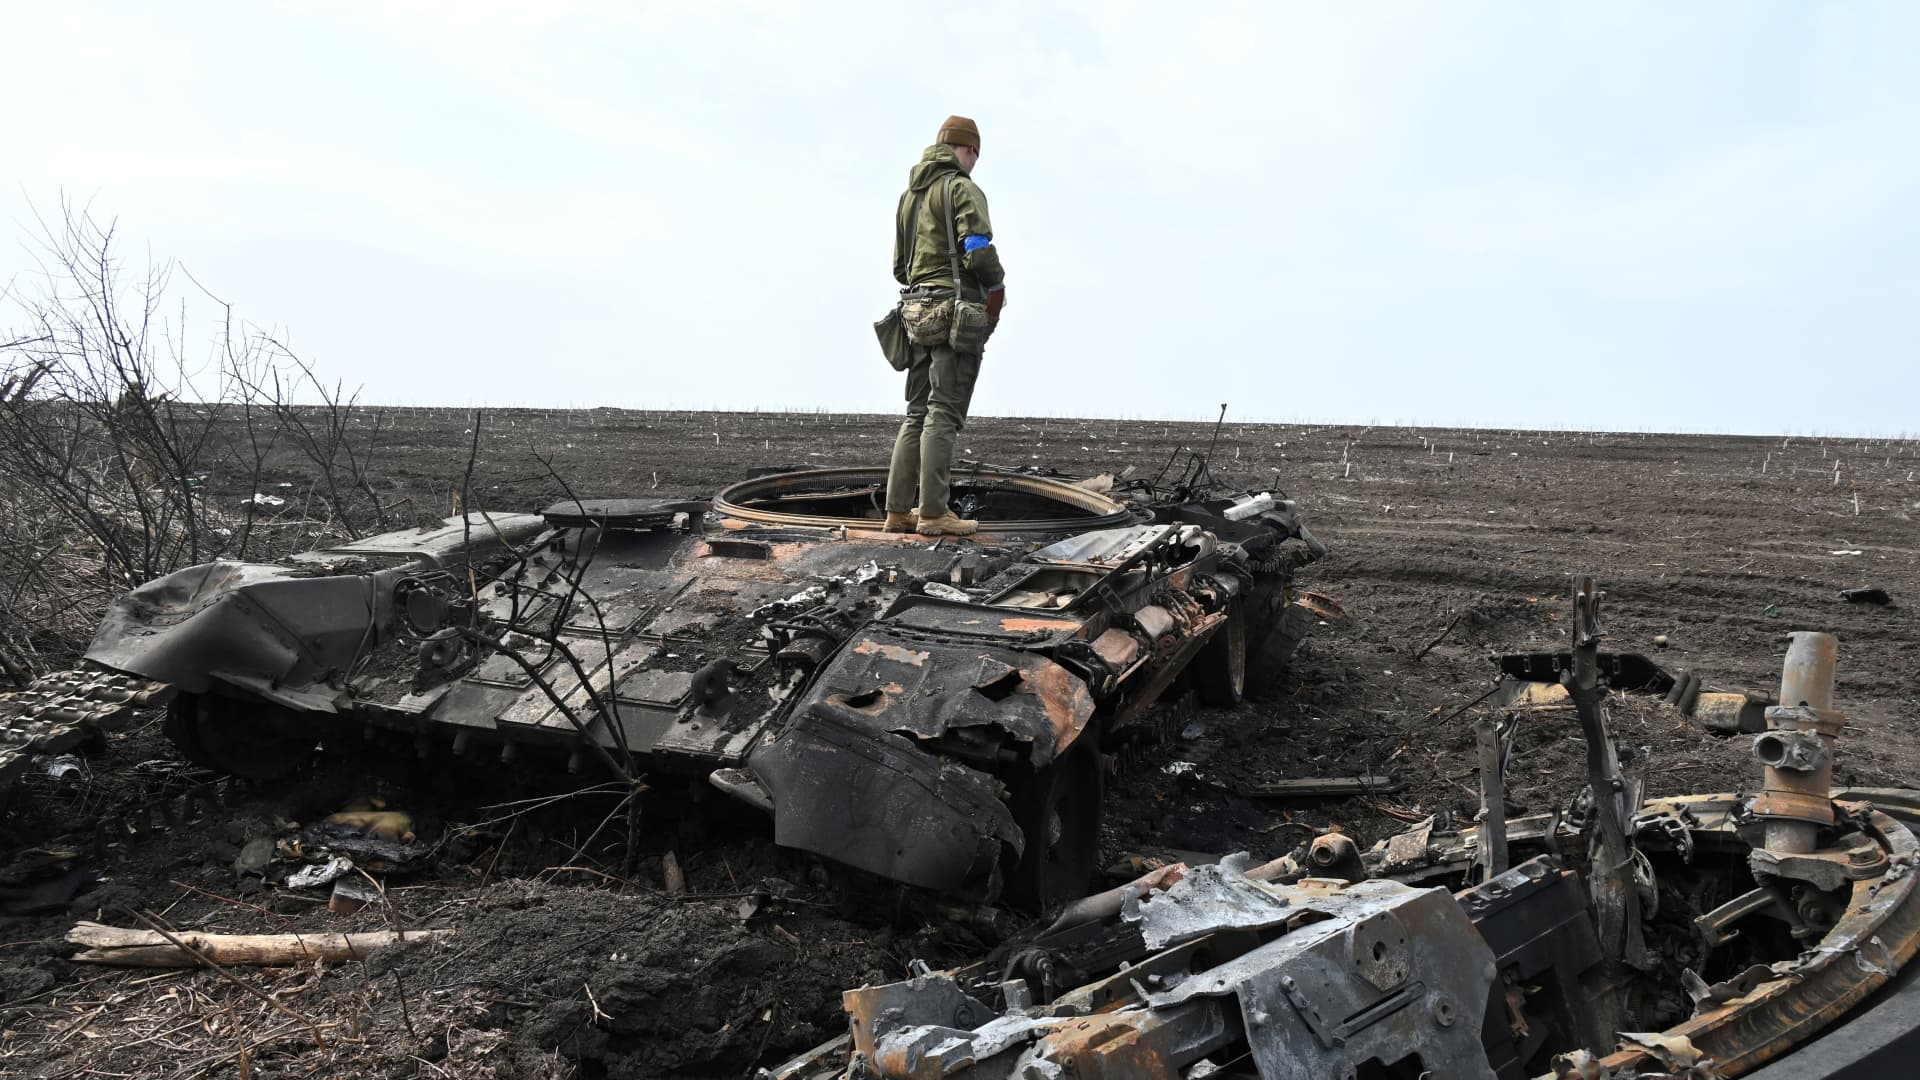 A Ukrainian soldier stands on the wreckage of a burnt Russian tank outside of the village of Mala Rogan, east of Kharkiv, on April 1, 2022.